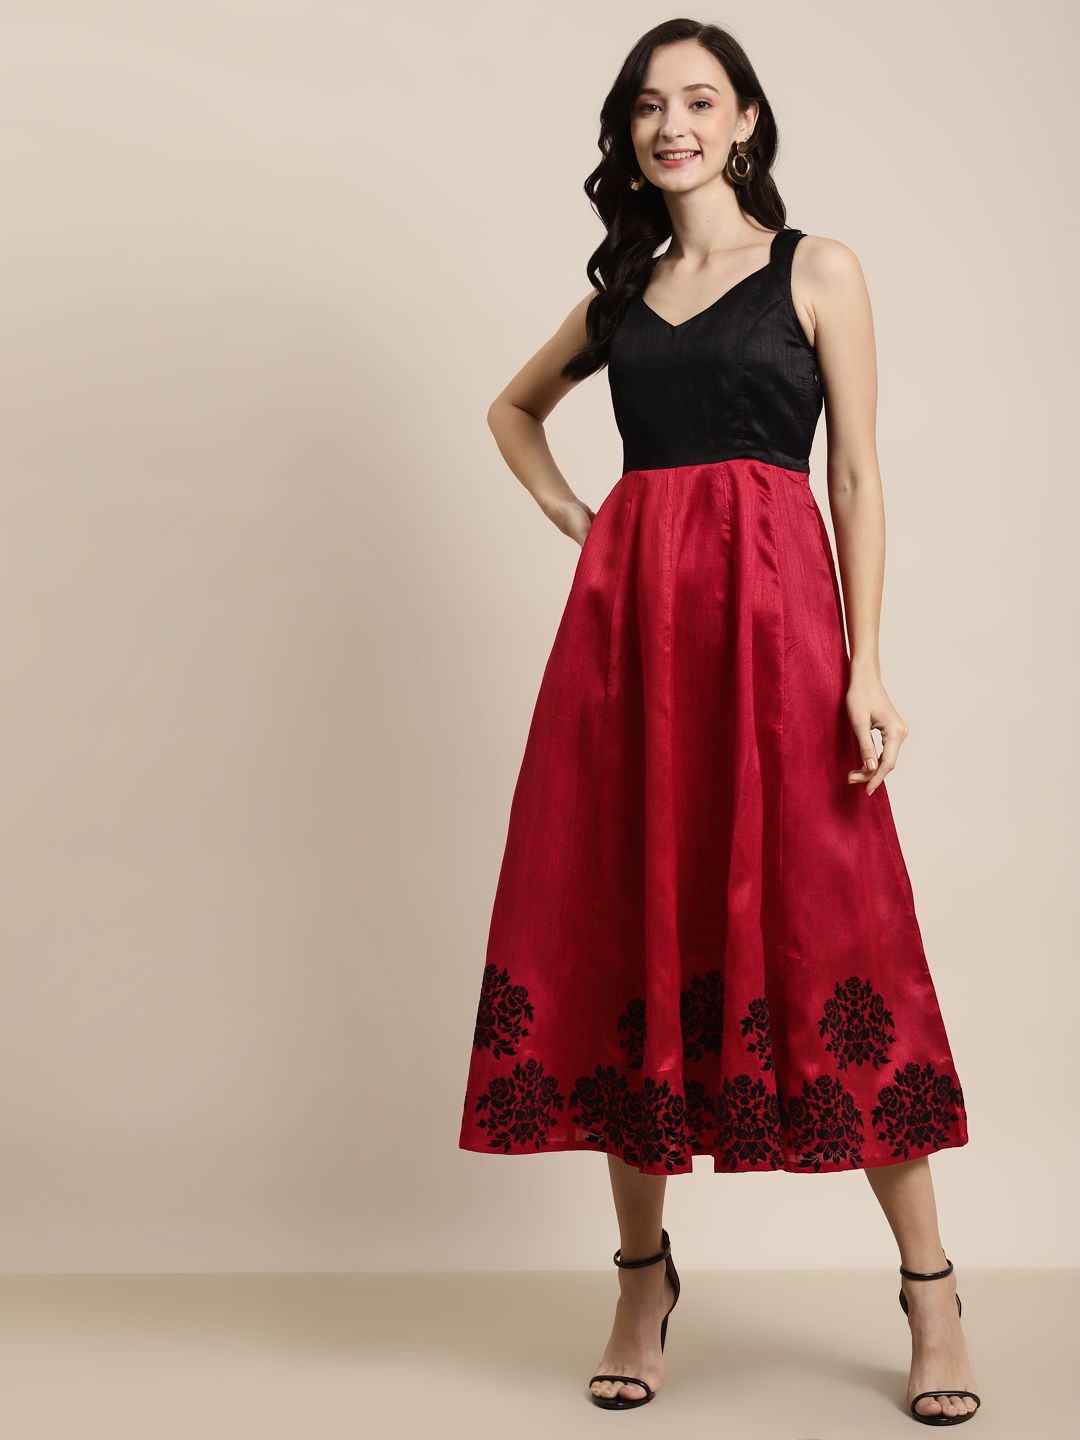 Shae by SASSAFRAS Red & Black Floral Maxi Dress Price in India